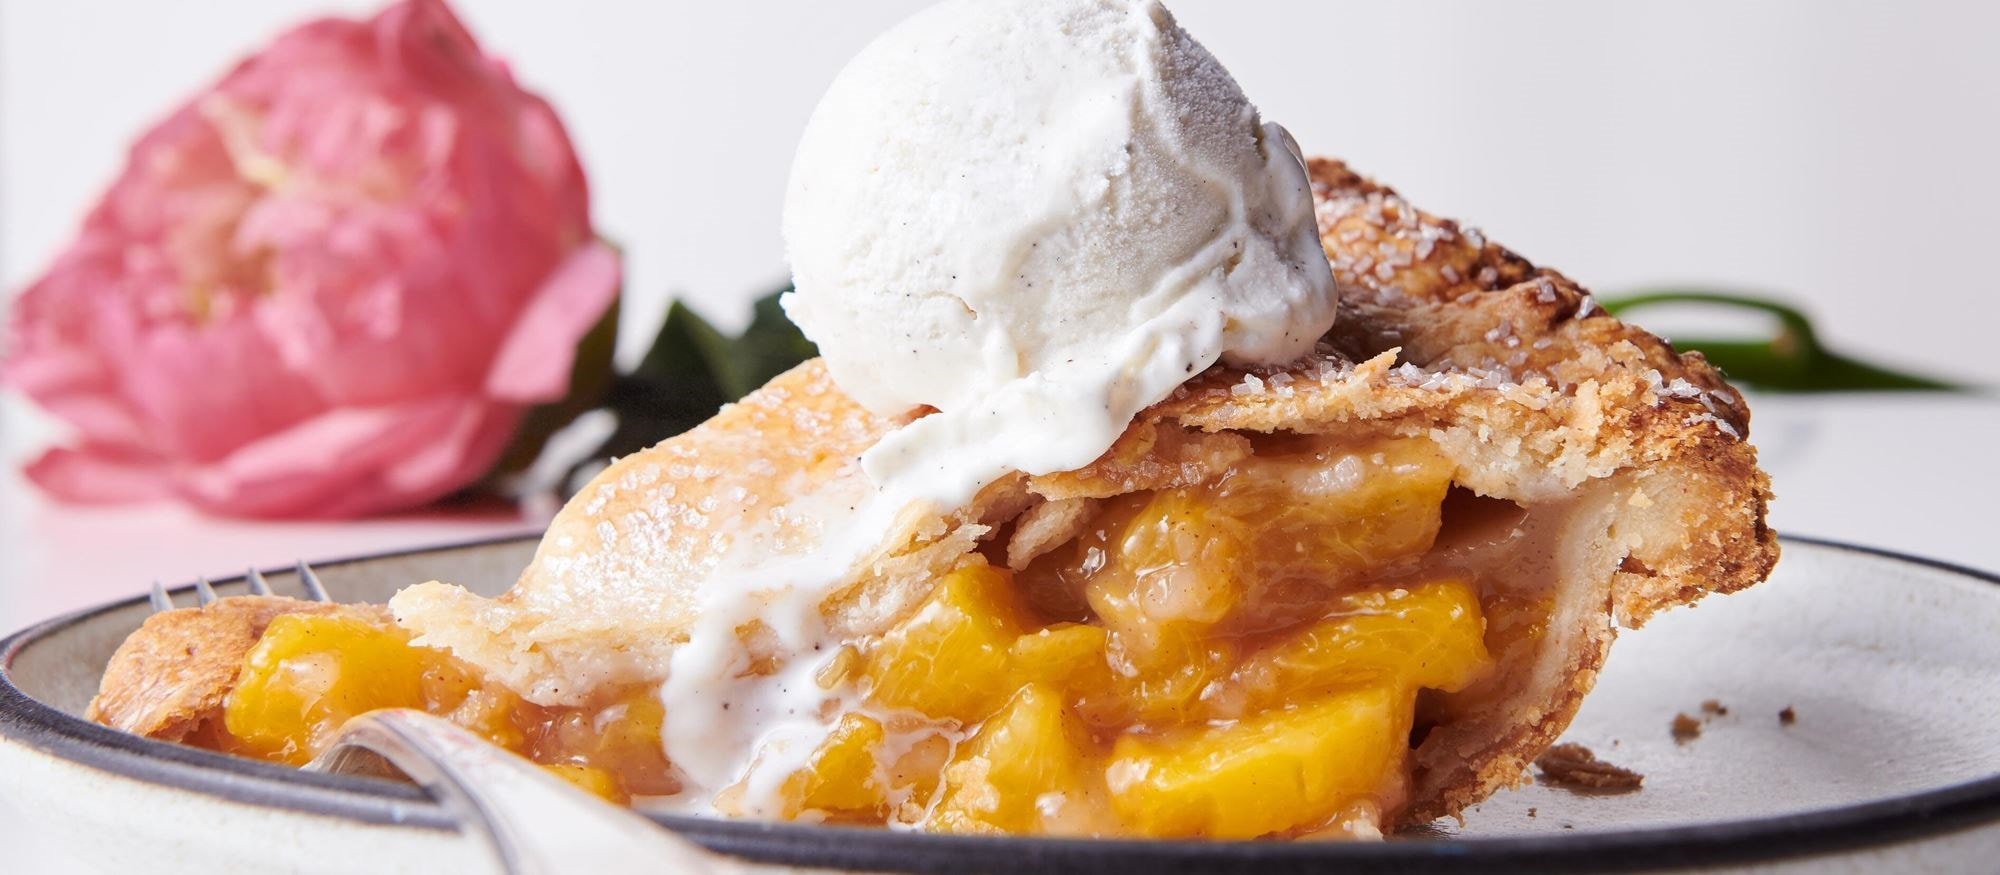 Easy and delicious Peach Pie  recipe using the Gourmet Mode setting of your Wolf Oven